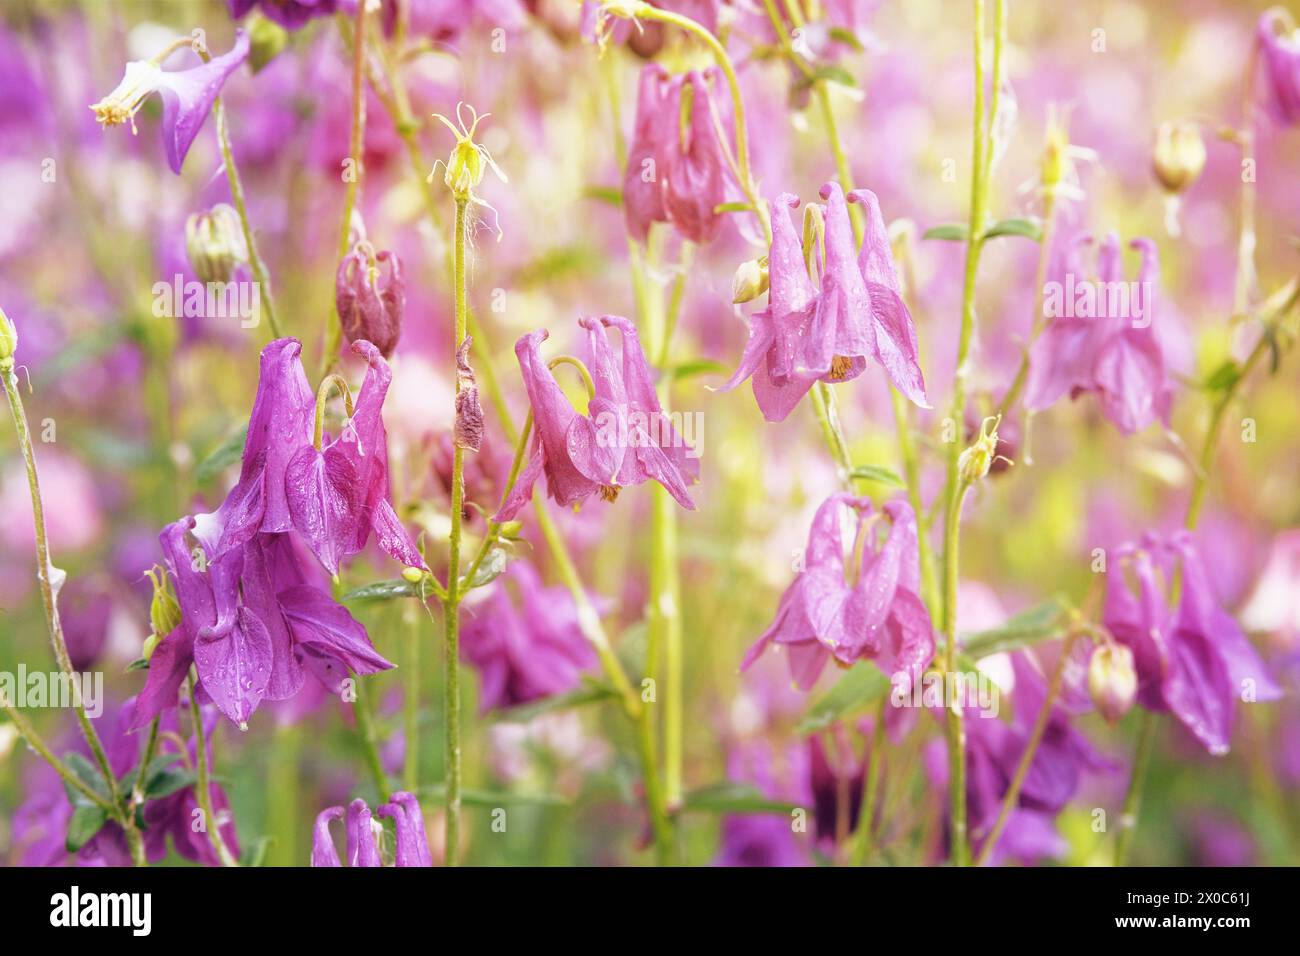 Aquilegia vulgaris flowers blooming with light bright petals. Spring blurred background of nature. Countryside. Sunny. Stock Photo